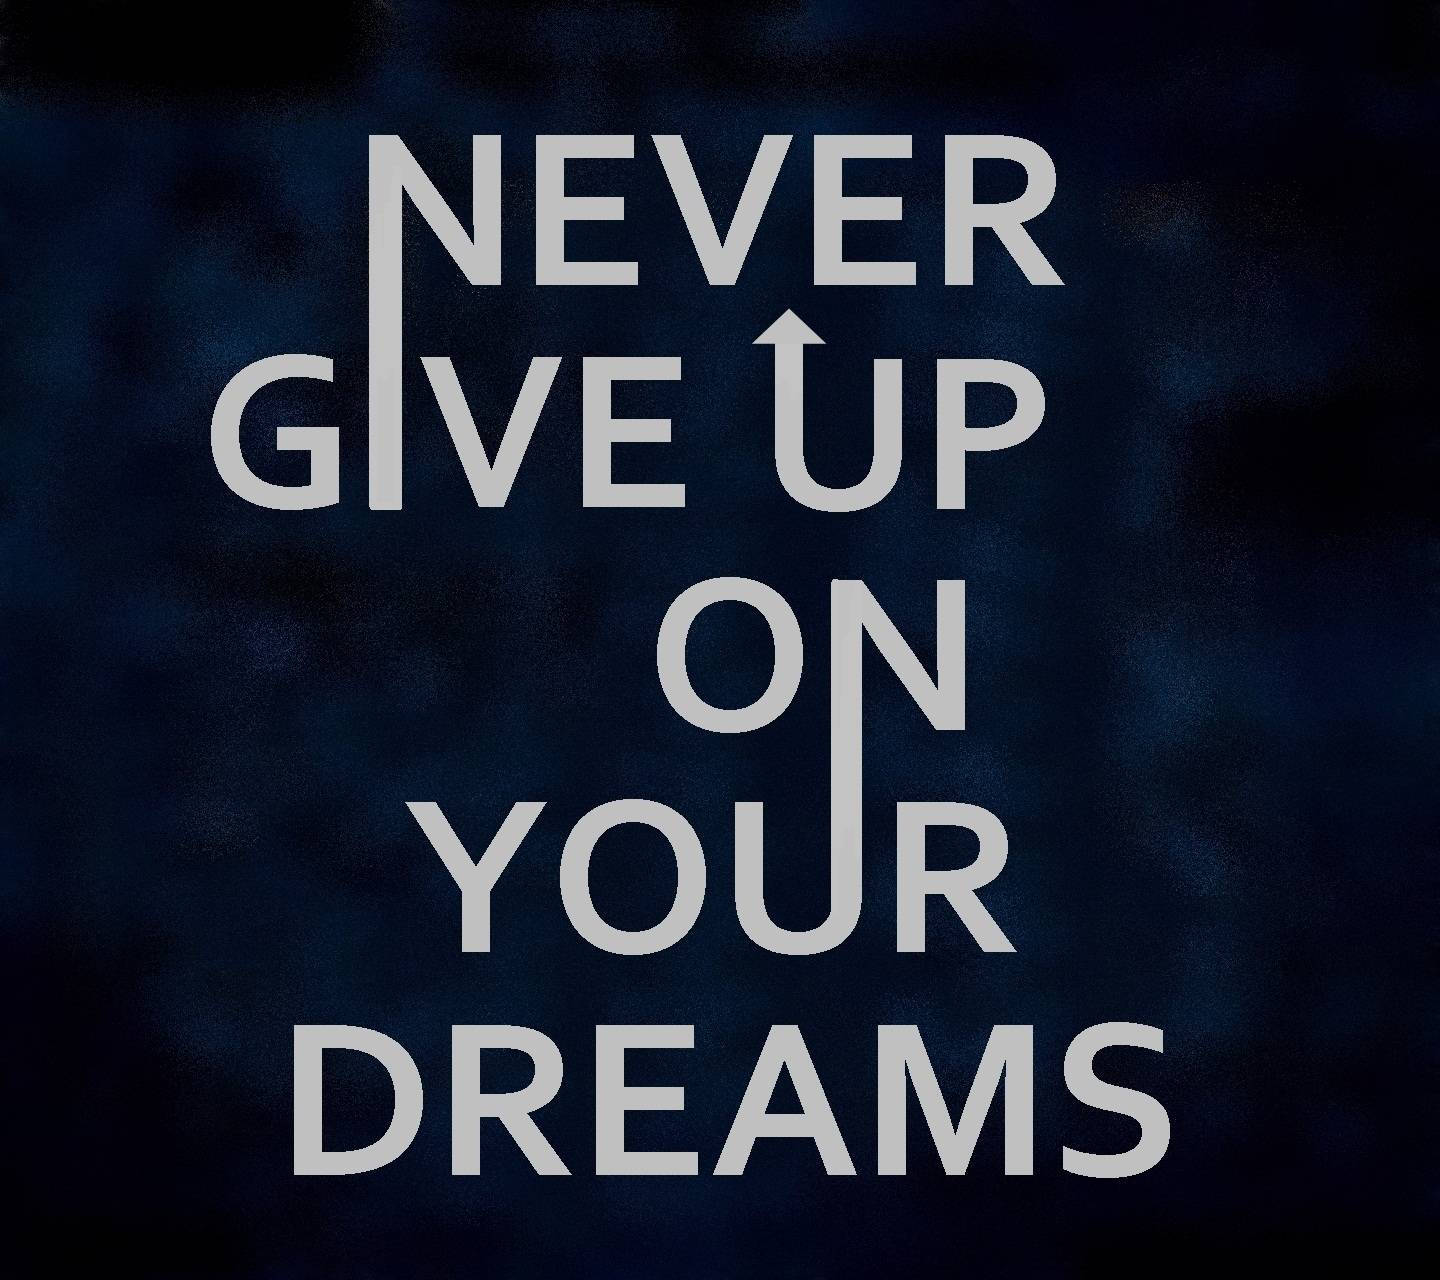 Embodying Persistence - Never Give Up On Dreams. Wallpaper